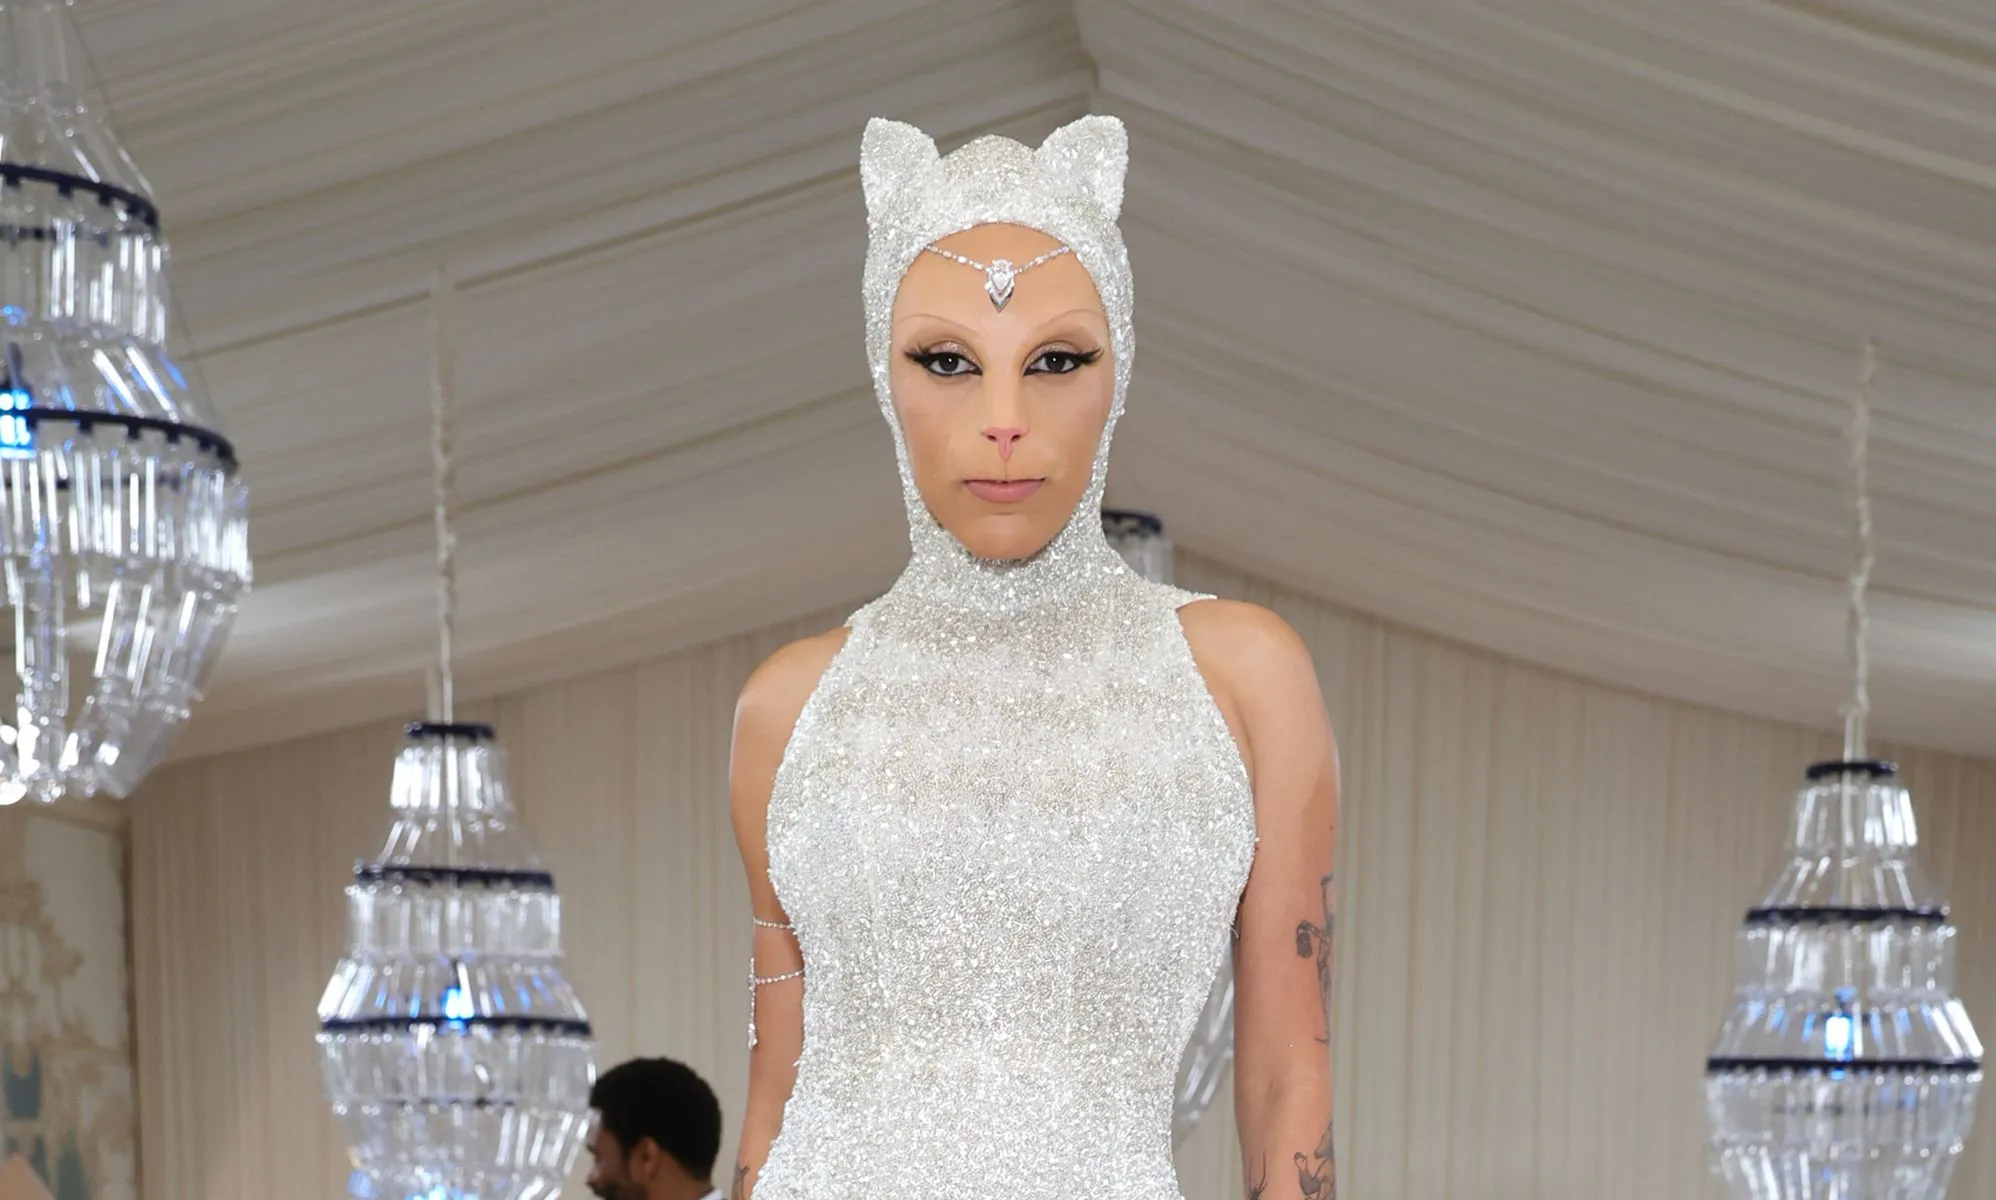 Who dressed up as a cat at the 2023 Met Gala awards? What did she say